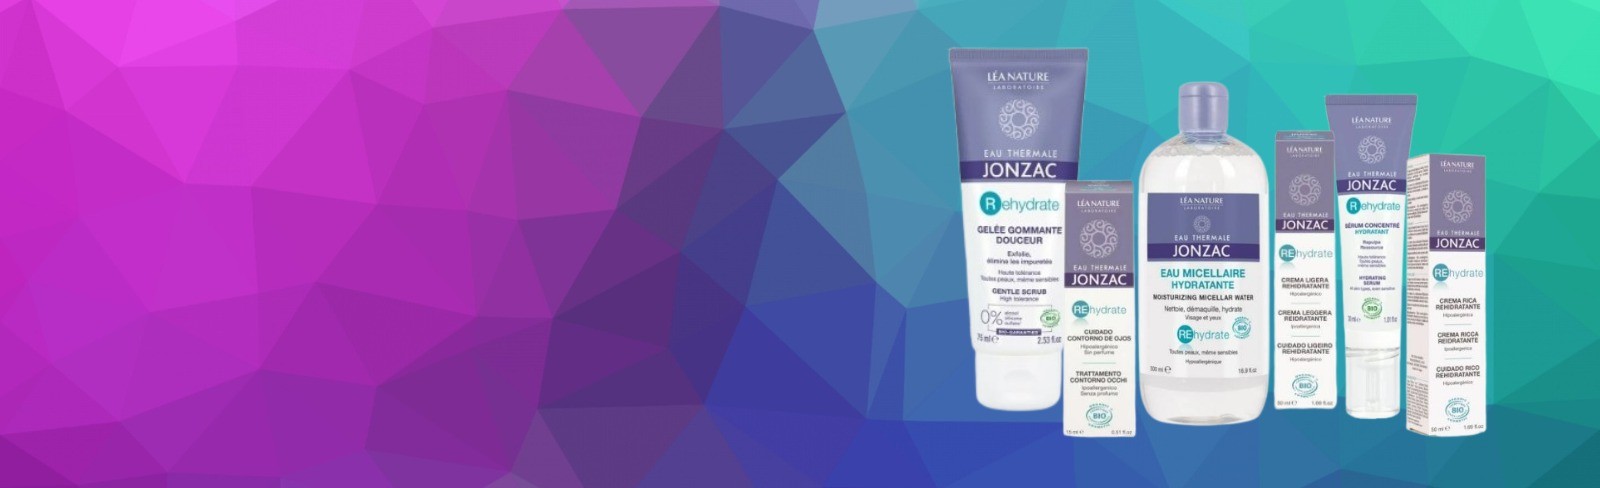 Selection of Jonzac products